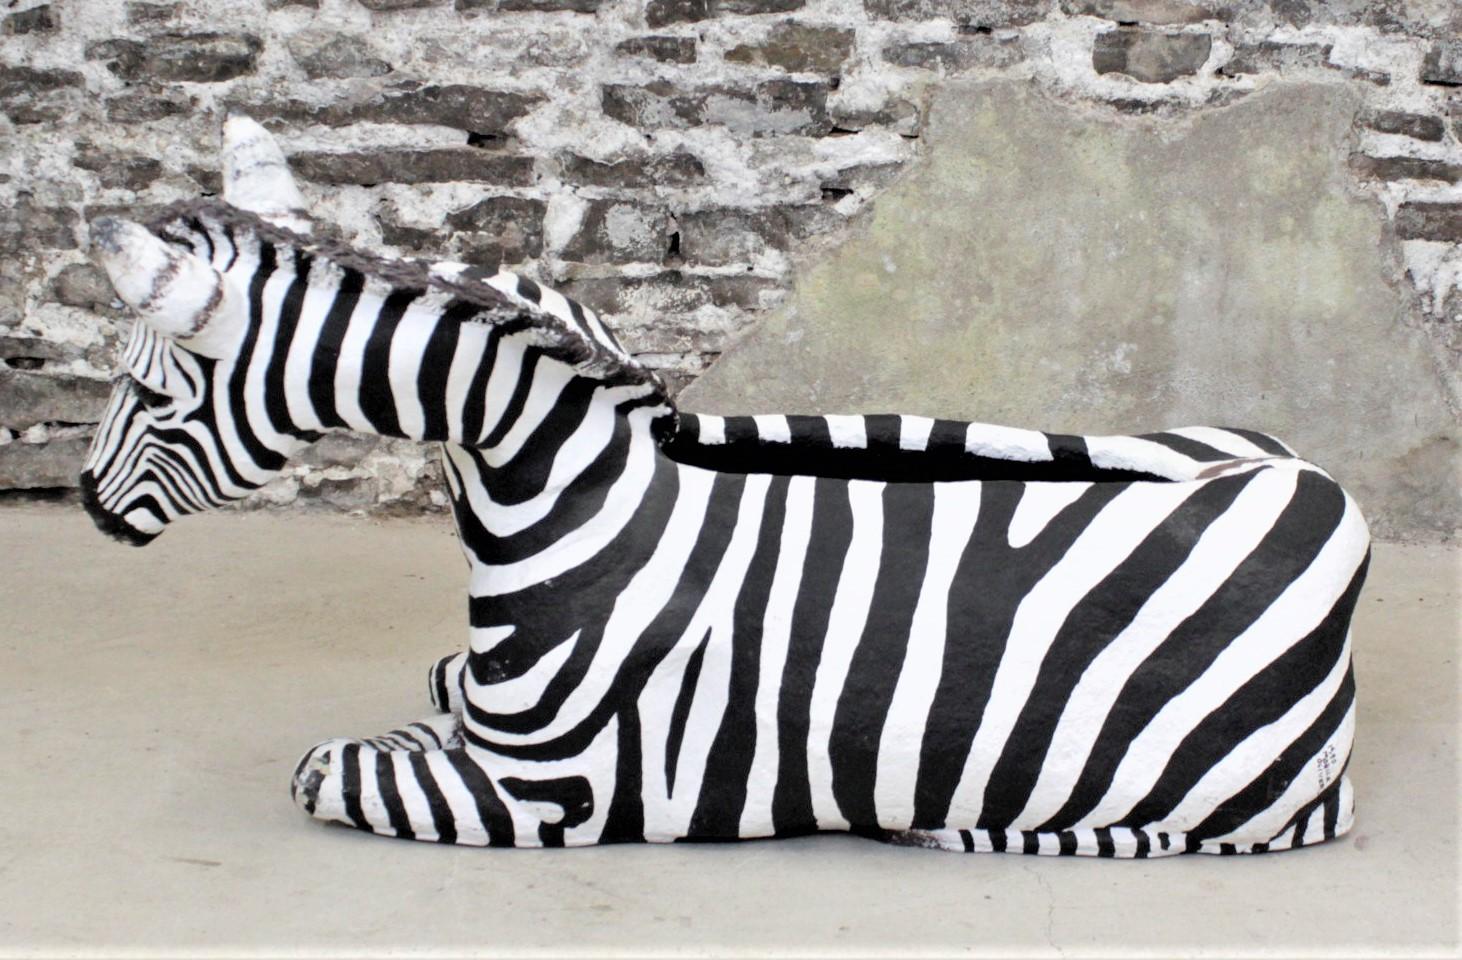 Canadian Large Vintage Hand-Crafted & Signed Mixed Media Zebra Sculpture or Planter Box For Sale